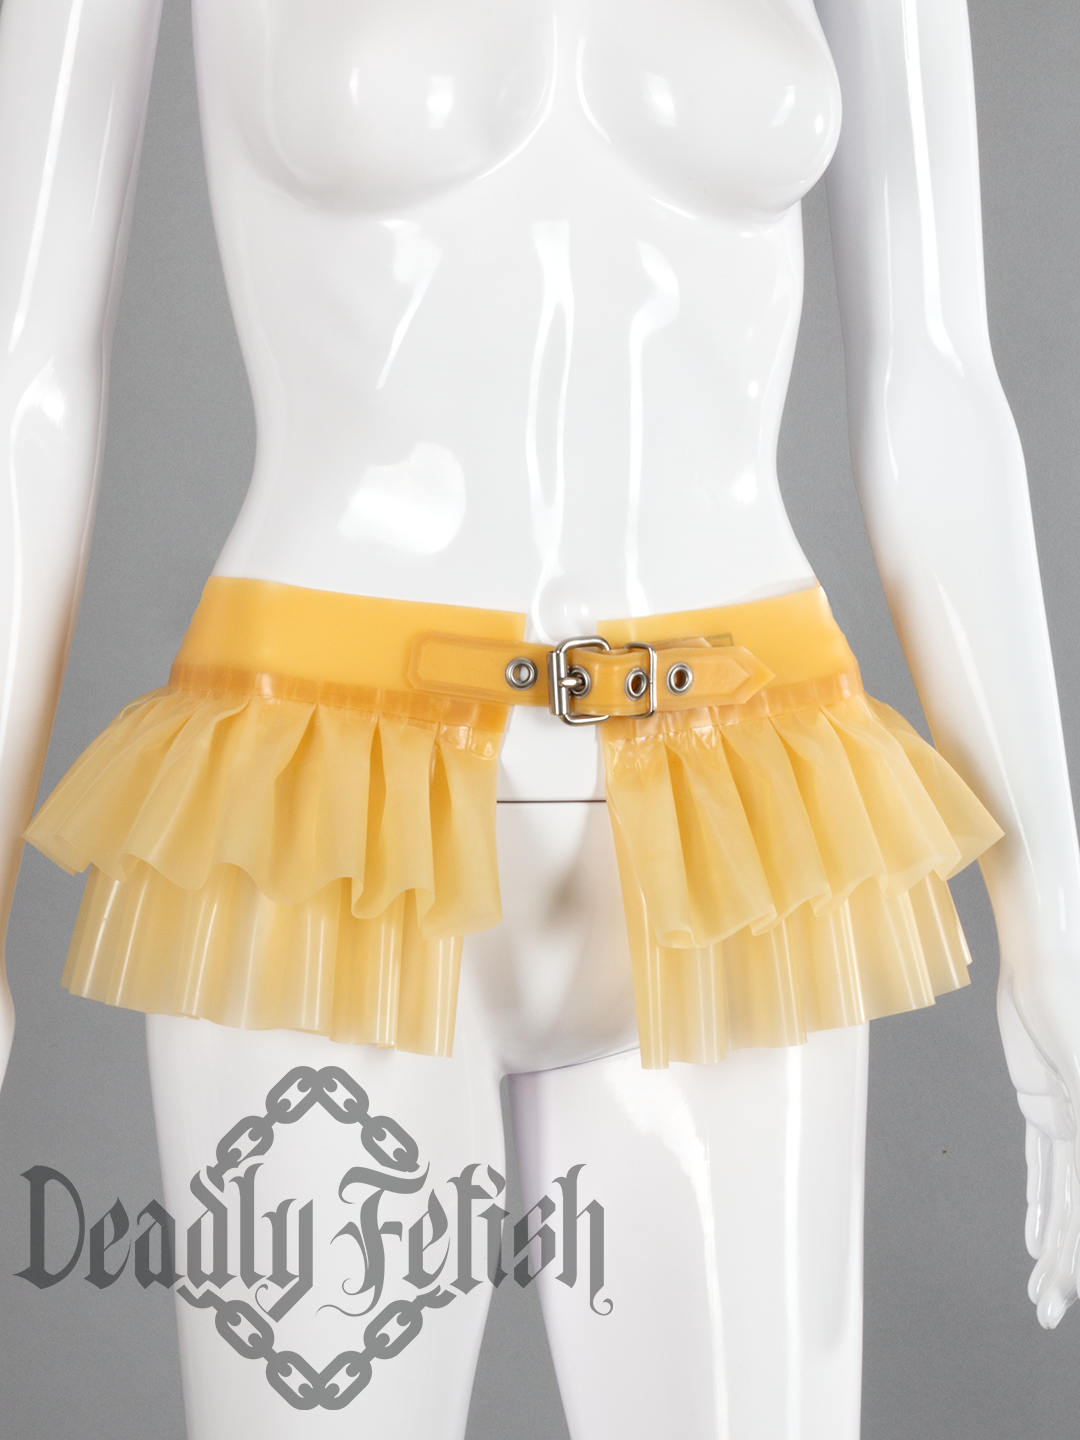 Deadly Fetish Made-To-Order Latex: Skirt #08